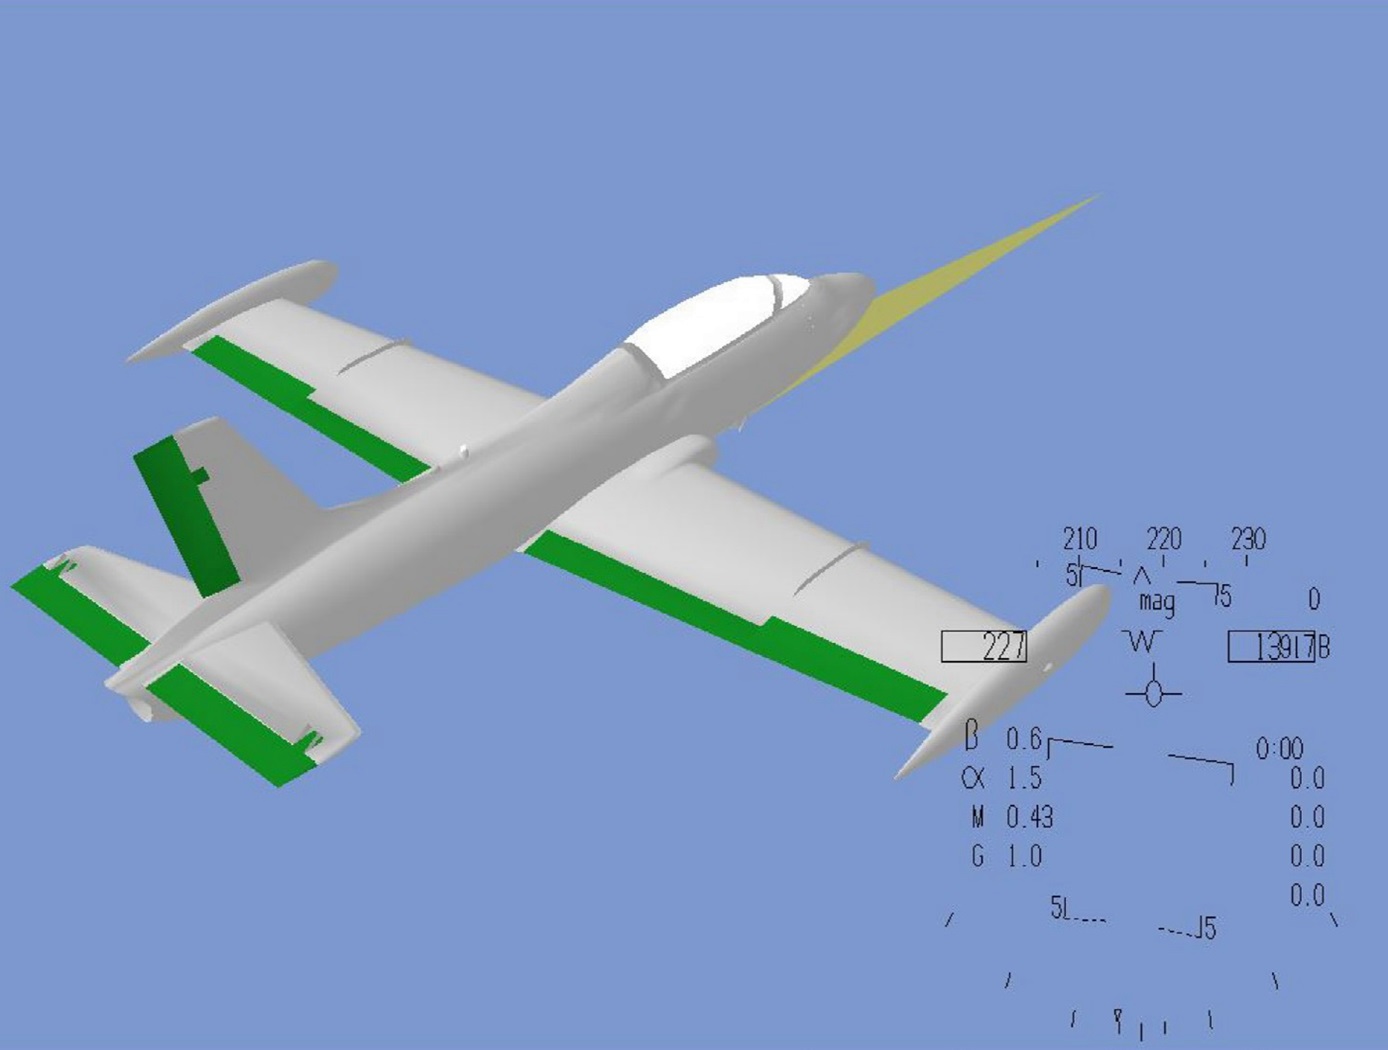 Inflight Global Nonlinear Aerodynamics Modeling and Simulation